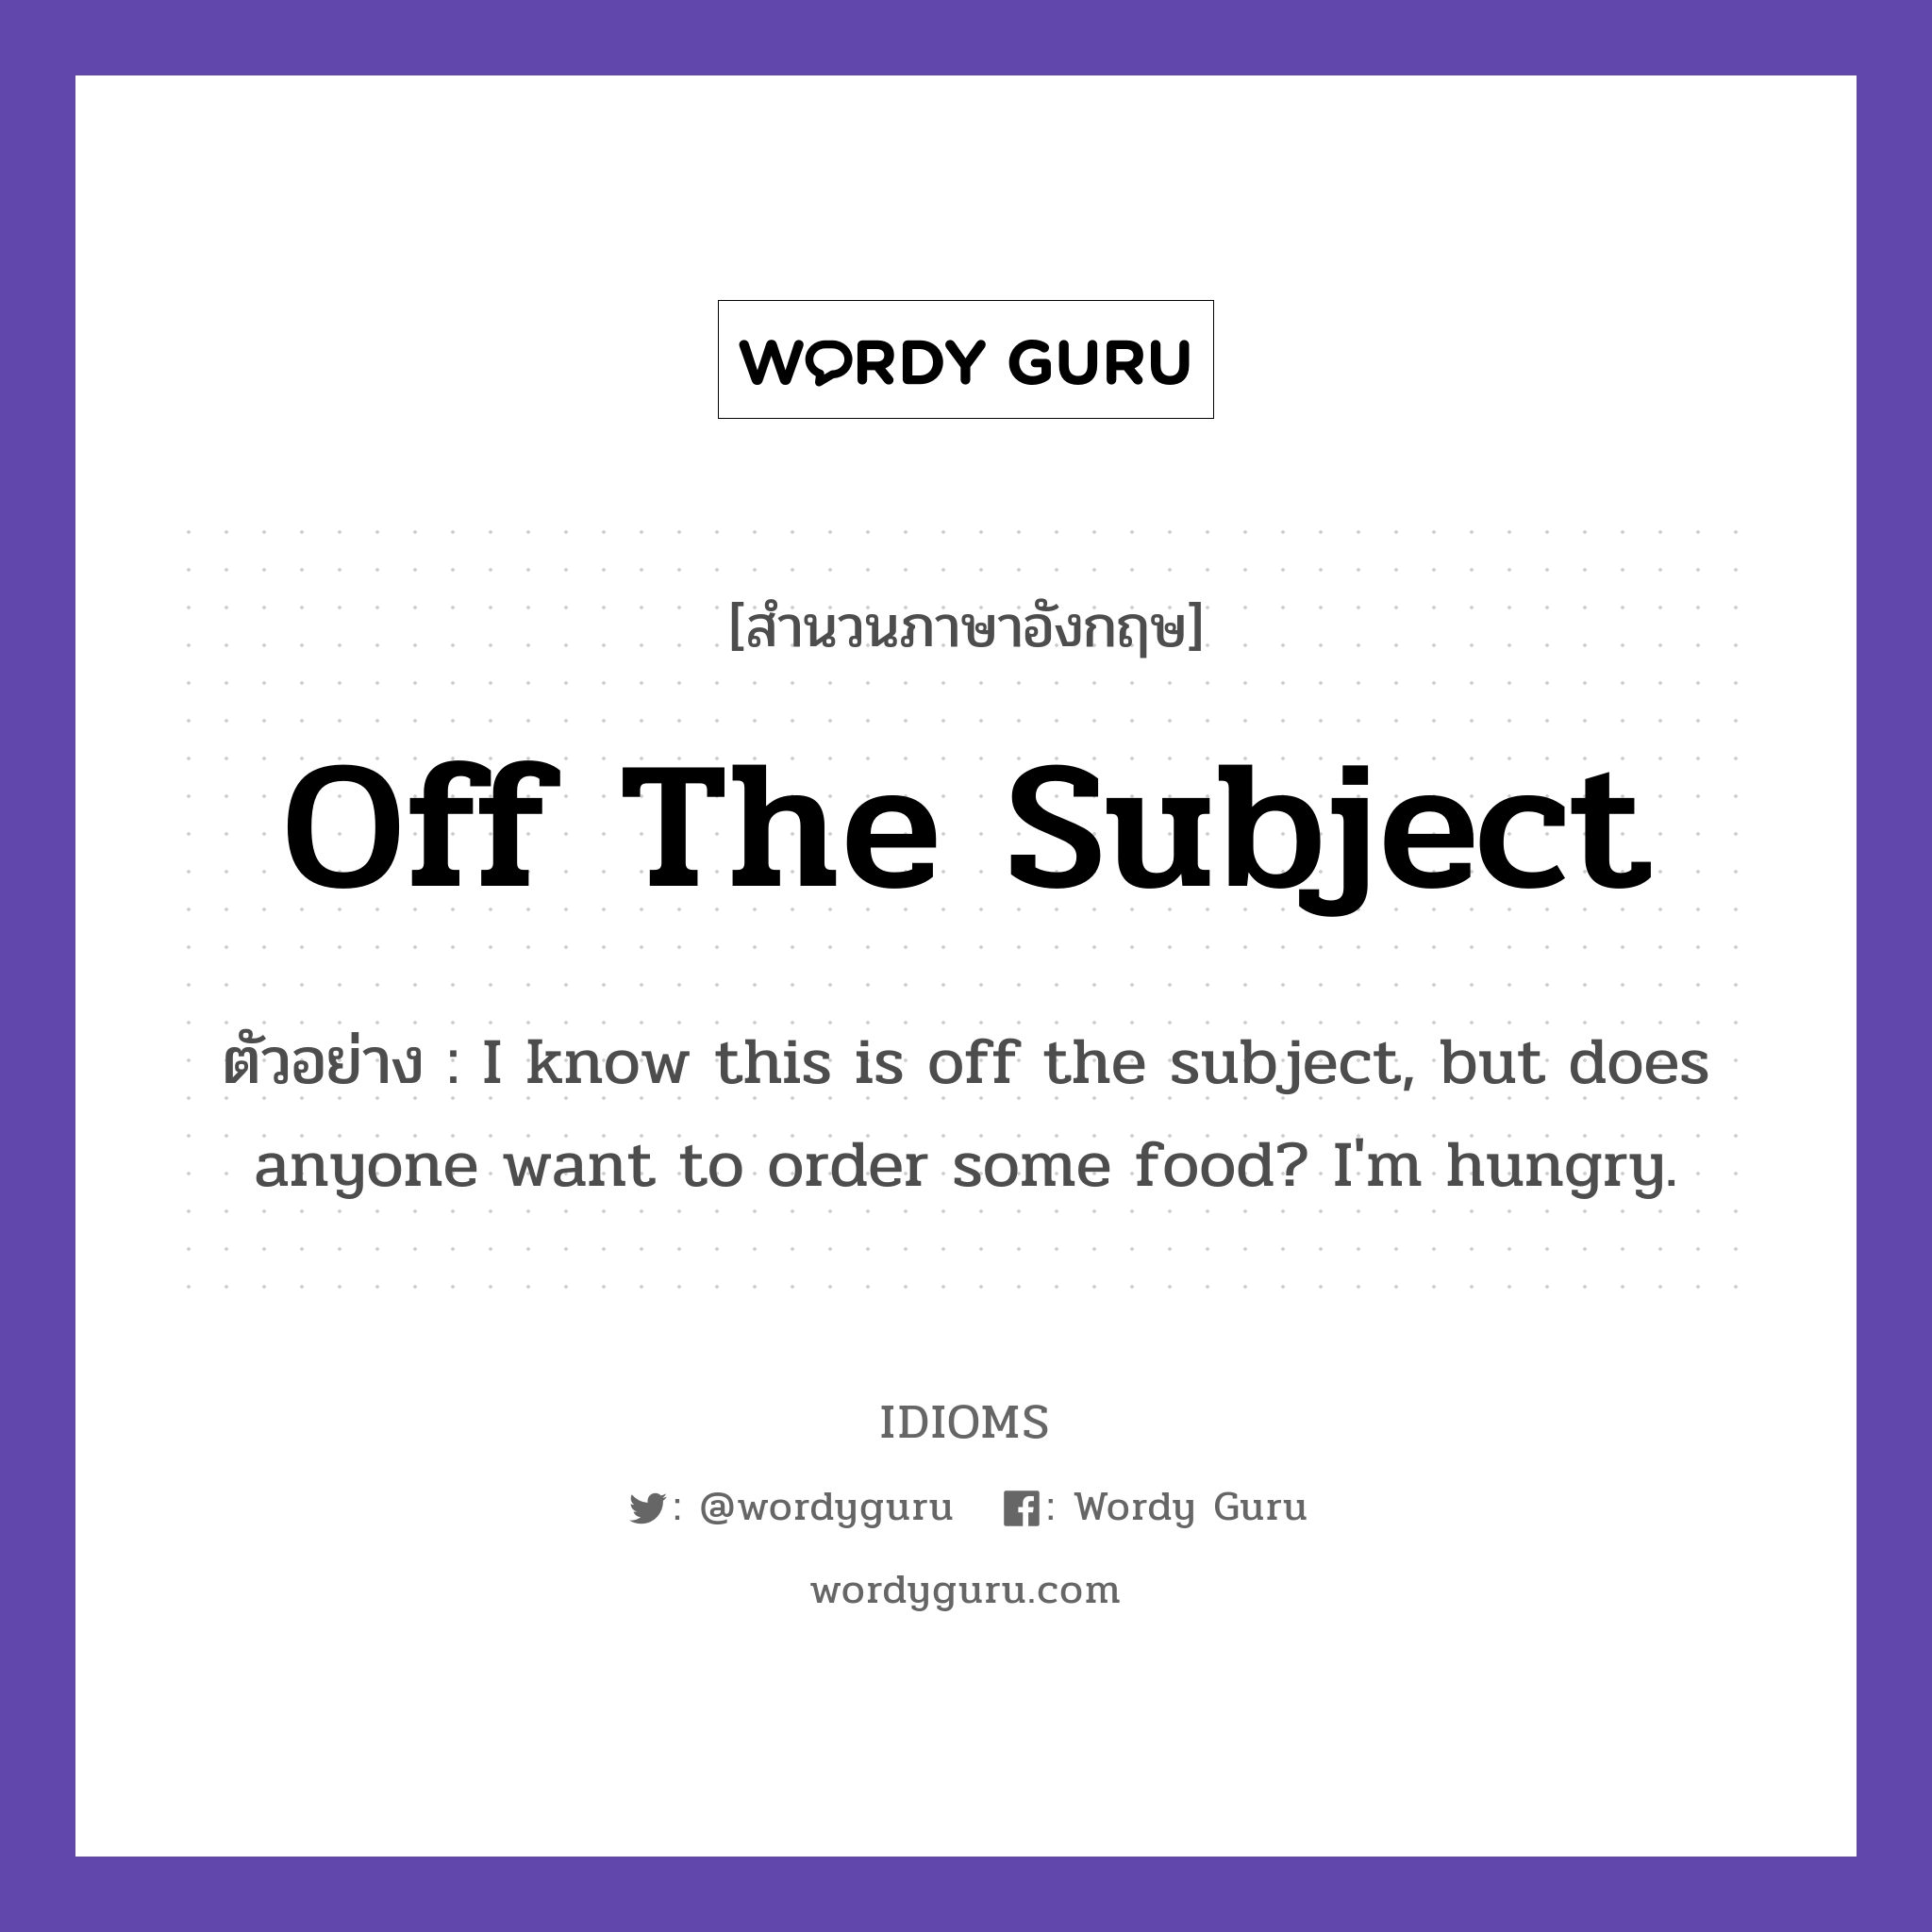 Off The Subject แปลว่า?, สำนวนภาษาอังกฤษ Off The Subject ตัวอย่าง I know this is off the subject, but does anyone want to order some food? I'm hungry.